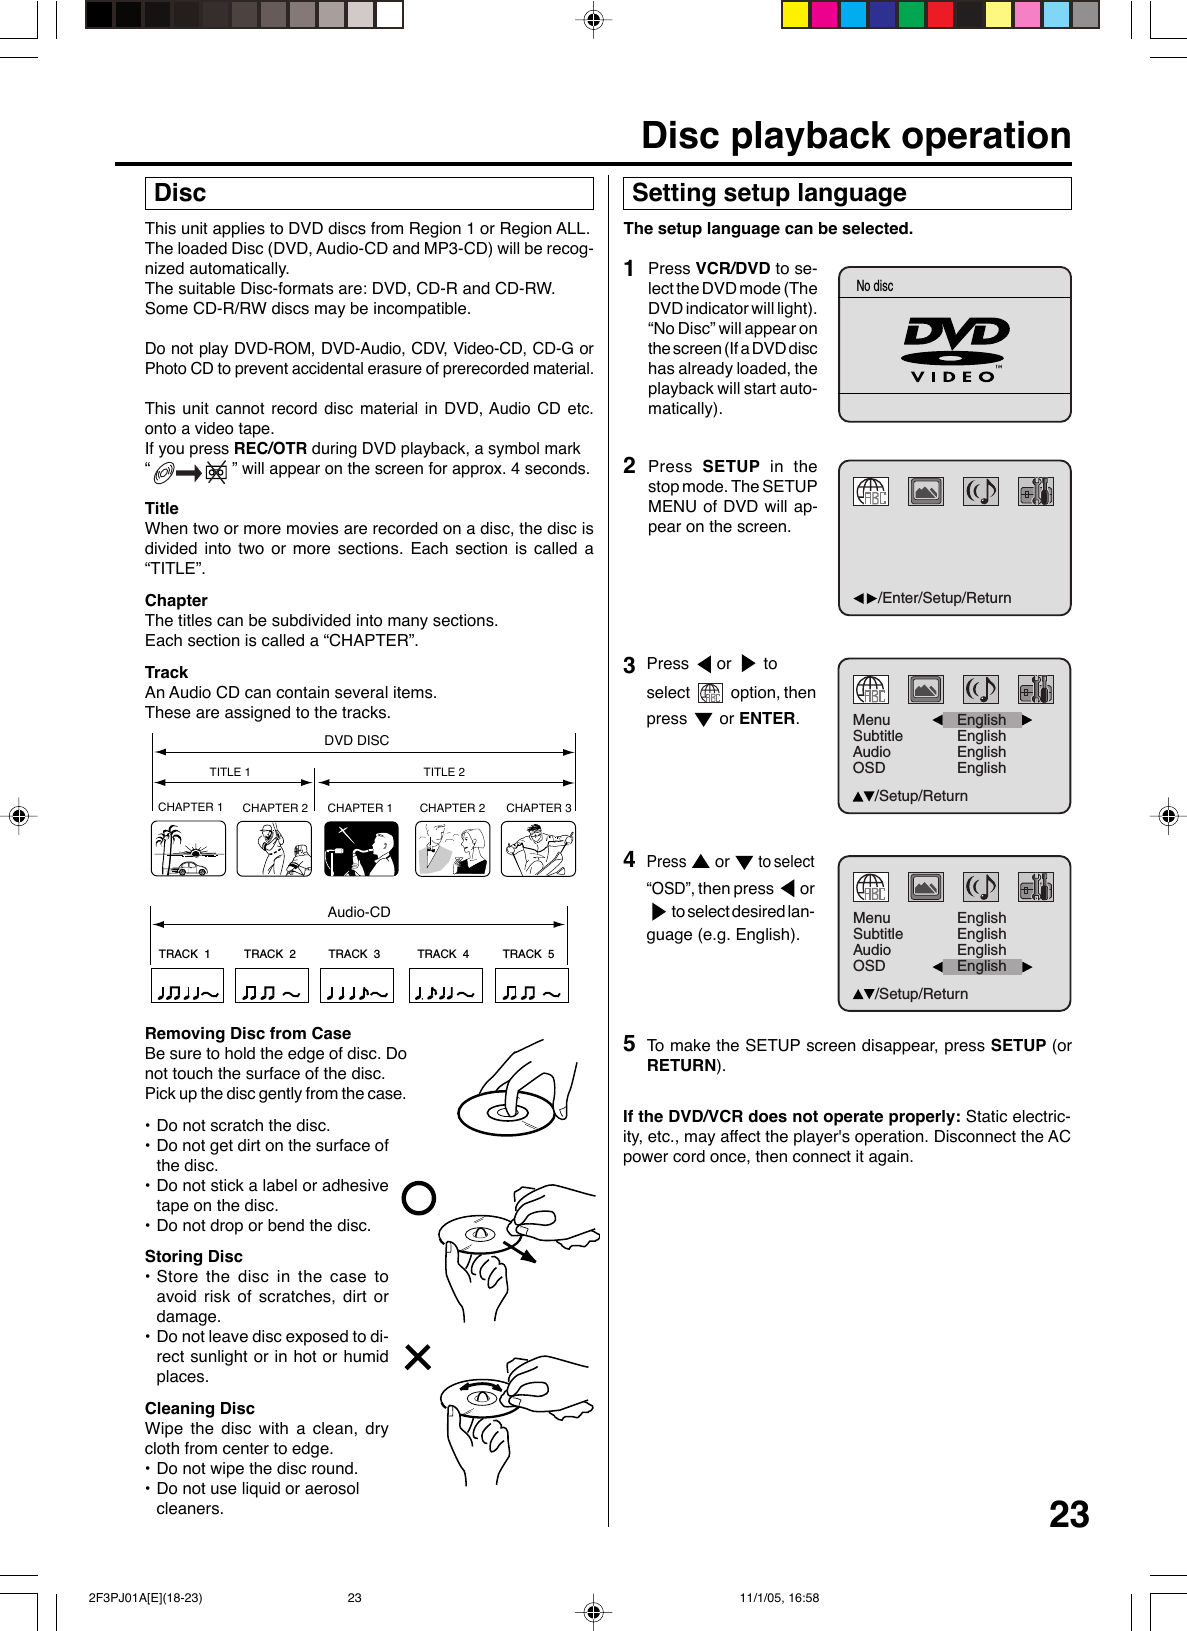 23This unit applies to DVD discs from Region 1 or Region ALL.The loaded Disc (DVD, Audio-CD and MP3-CD) will be recog-nized automatically.The suitable Disc-formats are: DVD, CD-R and CD-RW.Some CD-R/RW discs may be incompatible.Do not play DVD-ROM, DVD-Audio, CDV, Video-CD, CD-G orPhoto CD to prevent accidental erasure of prerecorded material.This unit cannot record disc material in DVD, Audio CD etc.onto a video tape.If you press REC/OTR during DVD playback, a symbol mark“                  ” will appear on the screen for approx. 4 seconds.TitleWhen two or more movies are recorded on a disc, the disc isdivided into two or more sections. Each section is called a“TITLE”.ChapterThe titles can be subdivided into many sections.Each section is called a “CHAPTER”.TrackAn Audio CD can contain several items.These are assigned to the tracks.CHAPTER 1TITLE 1 TITLE 2DVD DISCCHAPTER 2 CHAPTER 2 CHAPTER 3CHAPTER 1TRACK  1 TRACK  2 TRACK  3 TRACK  4 TRACK  5CDRemoving Disc from CaseBe sure to hold the edge of disc. Donot touch the surface of the disc.Pick up the disc gently from the case.•Do not scratch the disc.•Do not get dirt on the surface ofthe disc.•Do not stick a label or adhesivetape on the disc.•Do not drop or bend the disc.Storing Disc•Store the disc in the case toavoid risk of scratches, dirt ordamage.•Do not leave disc exposed to di-rect sunlight or in hot or humidplaces.Cleaning DiscWipe the disc with a clean, drycloth from center to edge.•Do not wipe the disc round.•Do not use liquid or aerosolcleaners. DiscAudio-CD Setting setup languageThe setup language can be selected.2Press  SETUP in thestop mode. The SETUPMENU of DVD will ap-pear on the screen.To  make the SETUP screen disappear, press SETUP (orRETURN).If the DVD/VCR does not operate properly: Static electric-ity, etc., may affect the player&apos;s operation. Disconnect the ACpower cord once, then connect it again.4Press  or  to select“OSD”, then press  or to select desired lan-guage (e.g. English).1Press VCR/DVD to se-lect the DVD mode (TheDVD indicator will light).“No Disc” will appear onthe screen (If a DVD dischas already loaded, theplayback will start auto-matically).Disc playback operation5Press  or   toselect   option, thenpress   or ENTER.3/Enter/Setup/ReturnNo discMenuSubtitleAudioOSDEnglishEnglishEnglish/Setup/ReturnEnglishMenuSubtitleAudioOSDEnglishEnglish/Setup/ReturnEnglishEnglish 2F3PJ01A[E](18-23) 11/1/05, 16:5823